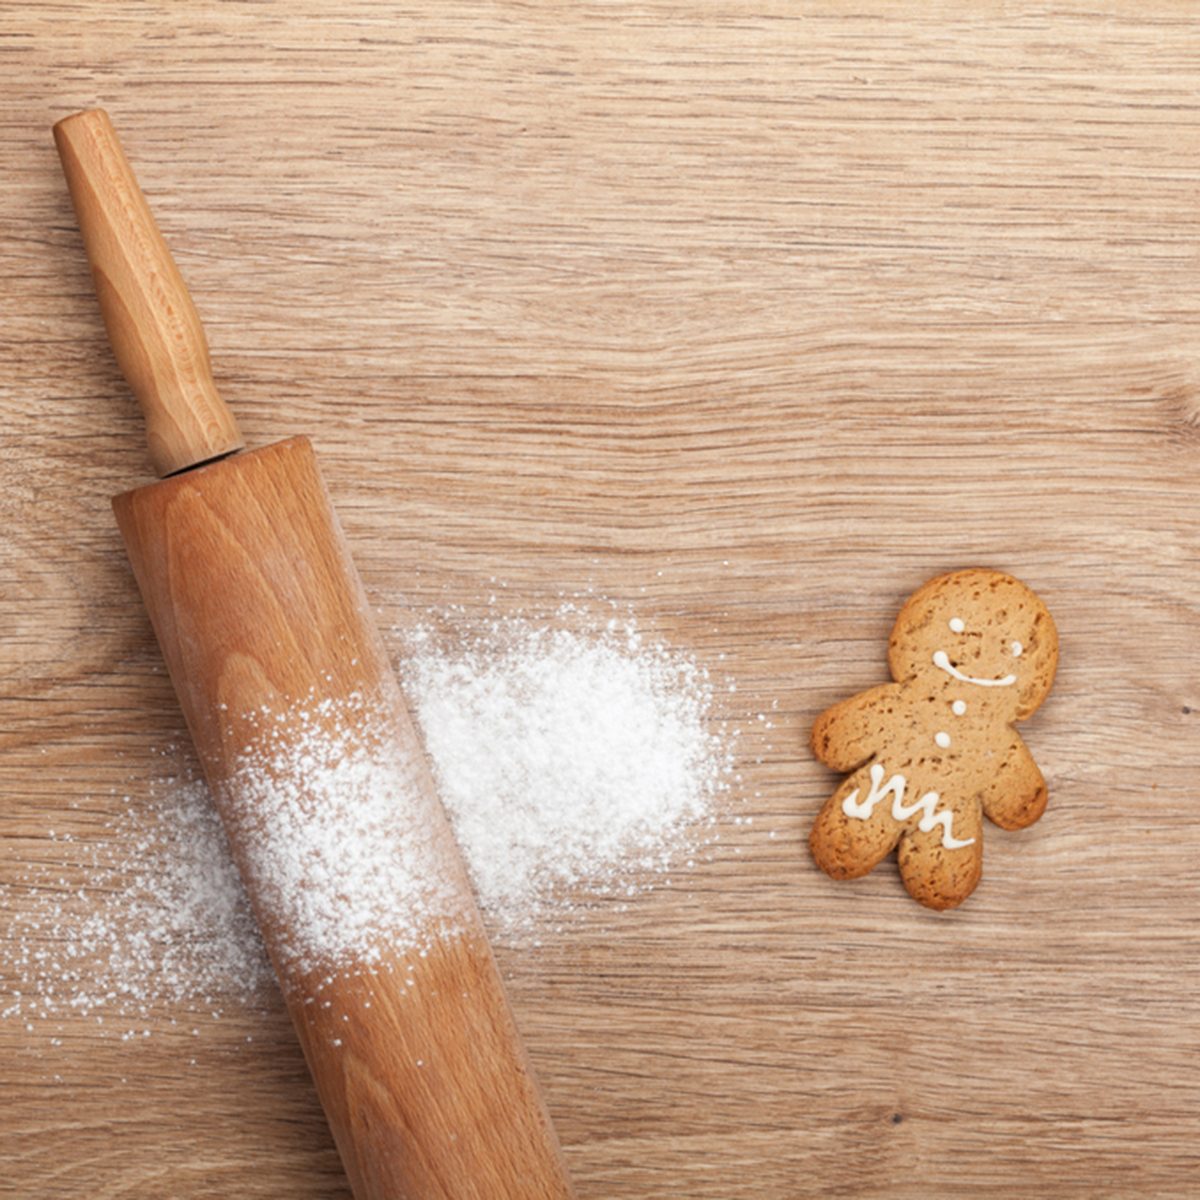 Rolling pin with flour and gingerbread cookie on wooden table.